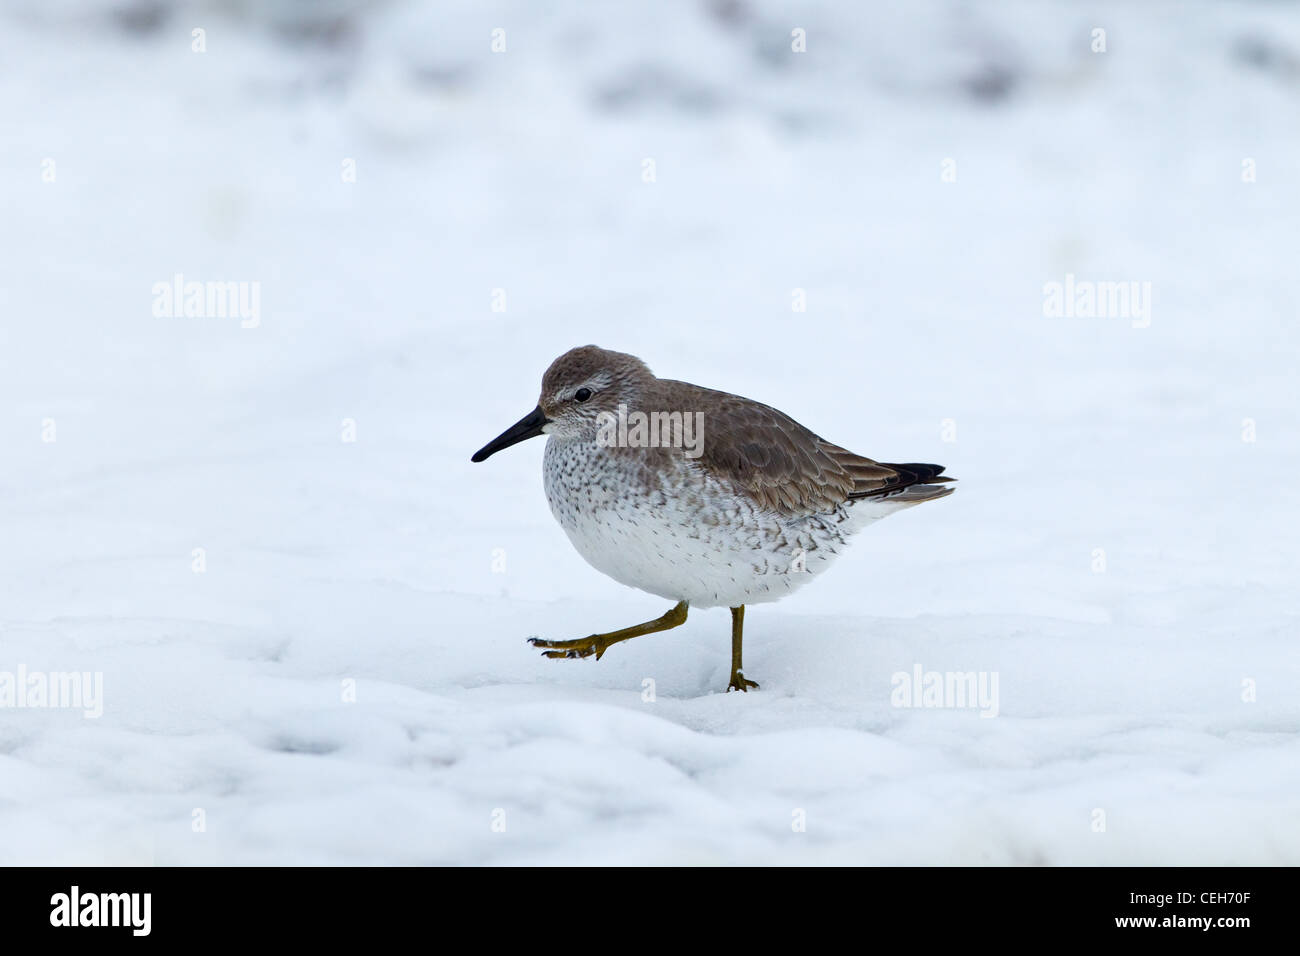 Knot Caldris canutus feeding in snow Banque D'Images